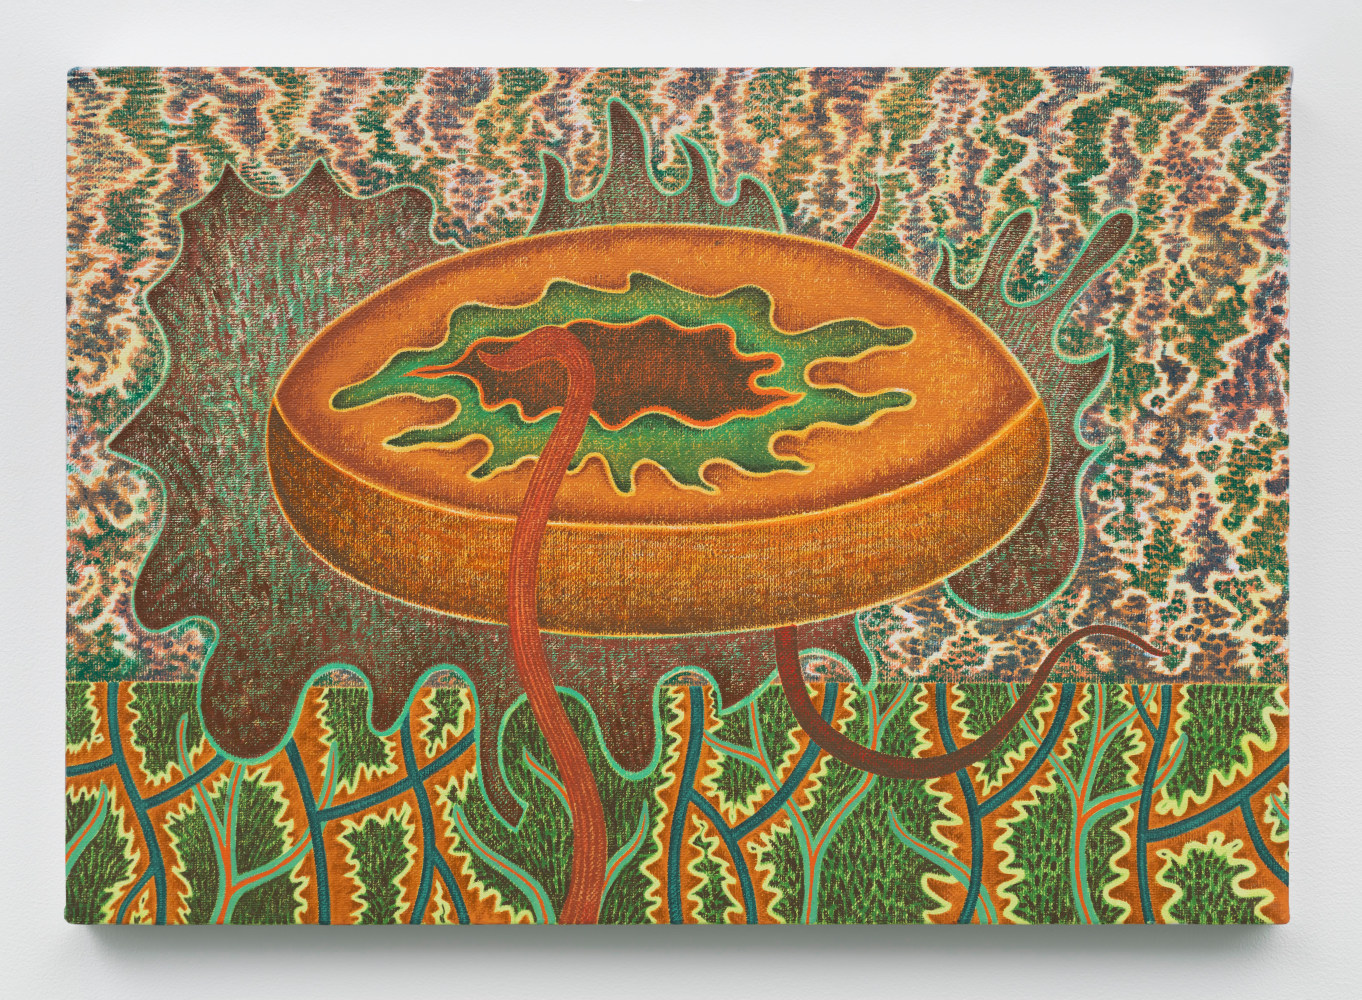 Forest Gift,&amp;nbsp;1987
Oil on canvas&amp;nbsp;
14 &amp;times; 20 inches
35.6 &amp;times; 50.8 centimeters&amp;nbsp;